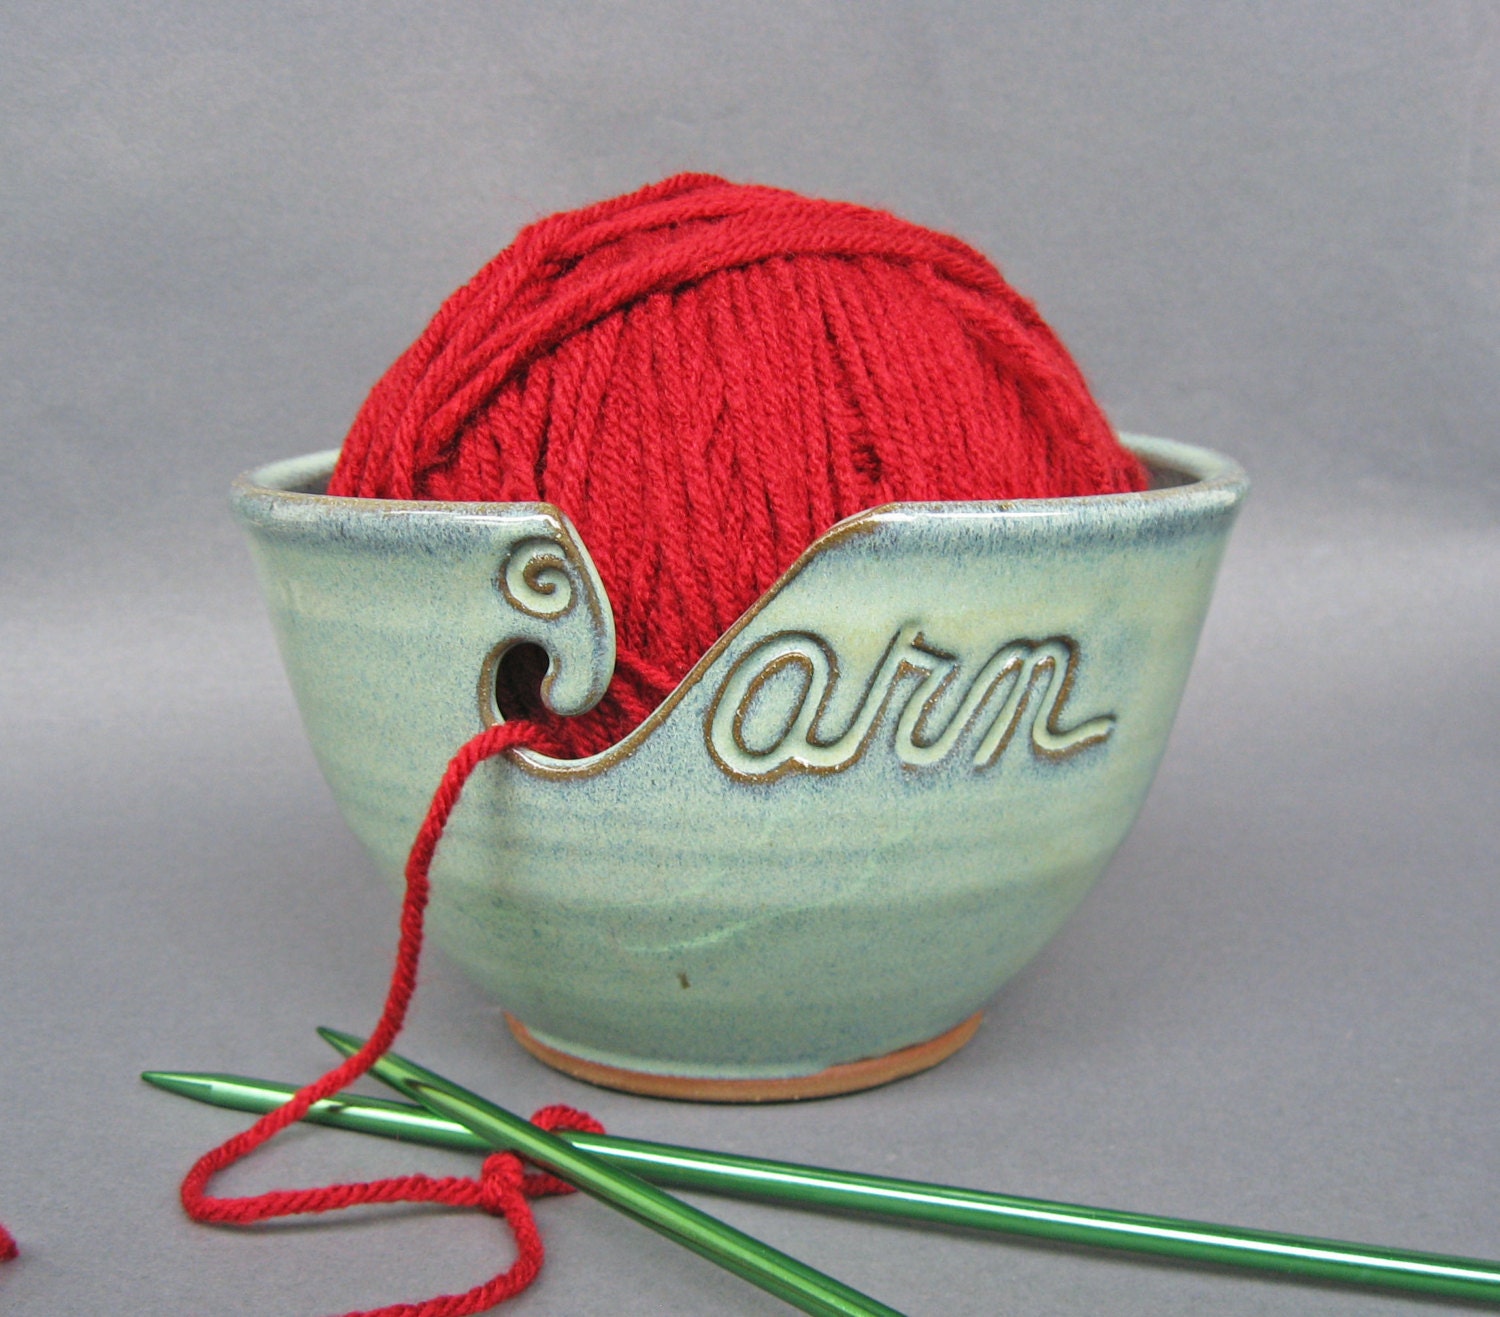 Yarn Bowl for Knitting & Crochet in Green – The Mud Place